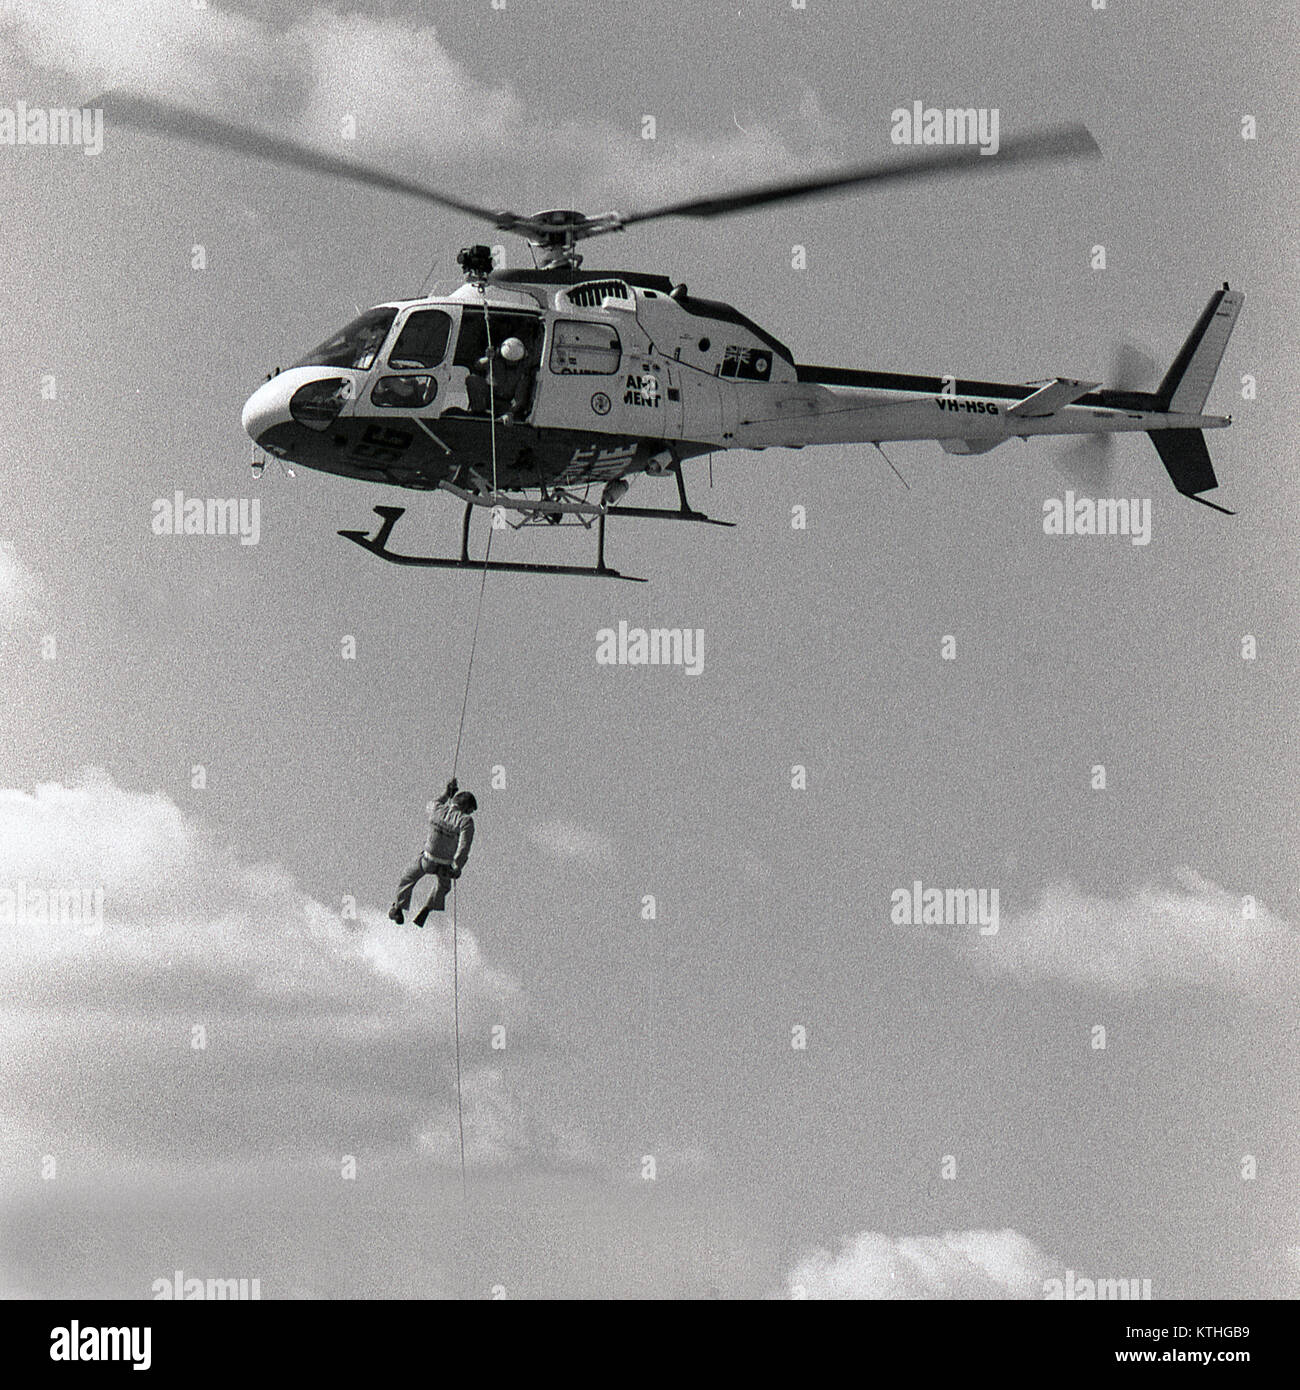 GOONDIWINDI, AUSTRALIA, CIRCA 1982: Unidentified crew member of the Queensland Government rescue helicopter abseils to the ground from helicopter, circa 1982 in Goondiwindi, Australia Stock Photo